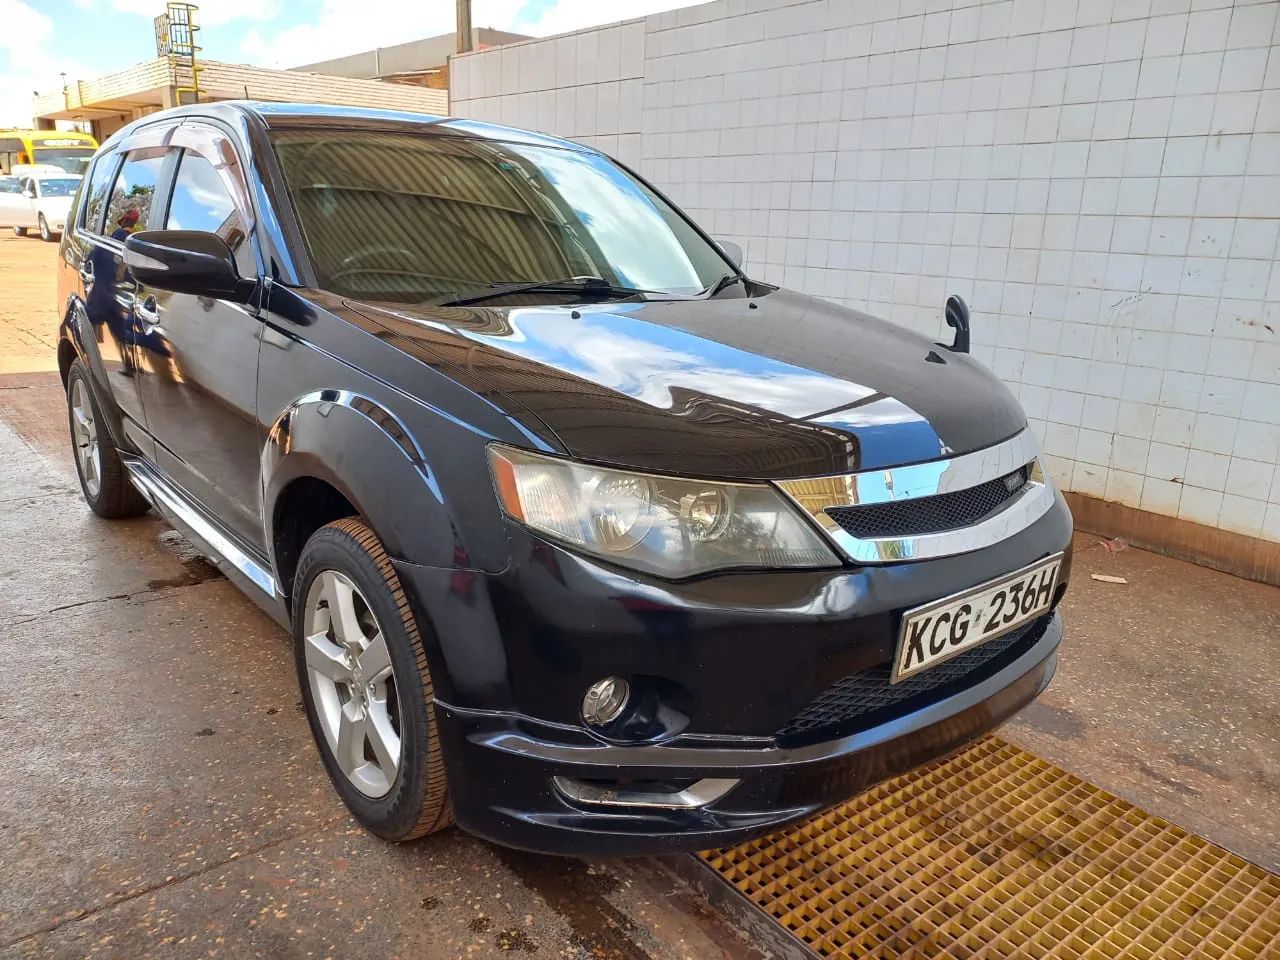 Cars Cars For Sale/Vehicles SUV-Mitsubishi Outlander 2008 Pay 20% Deposit Hot Deal 9